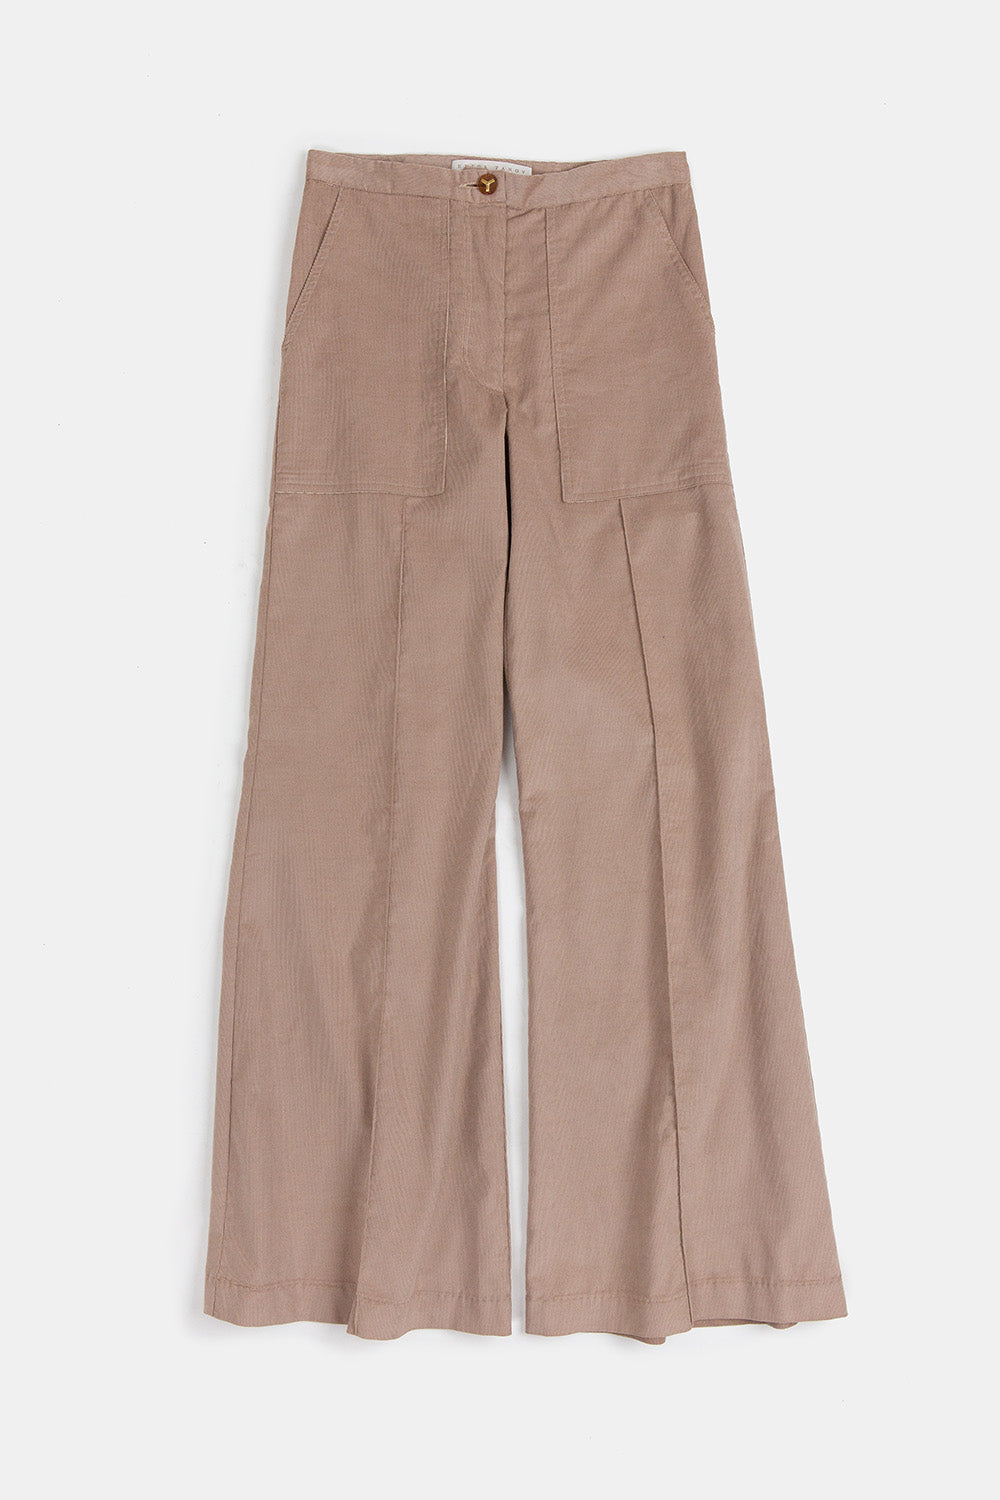 Darby Cotton Corduroy Pants In Sand